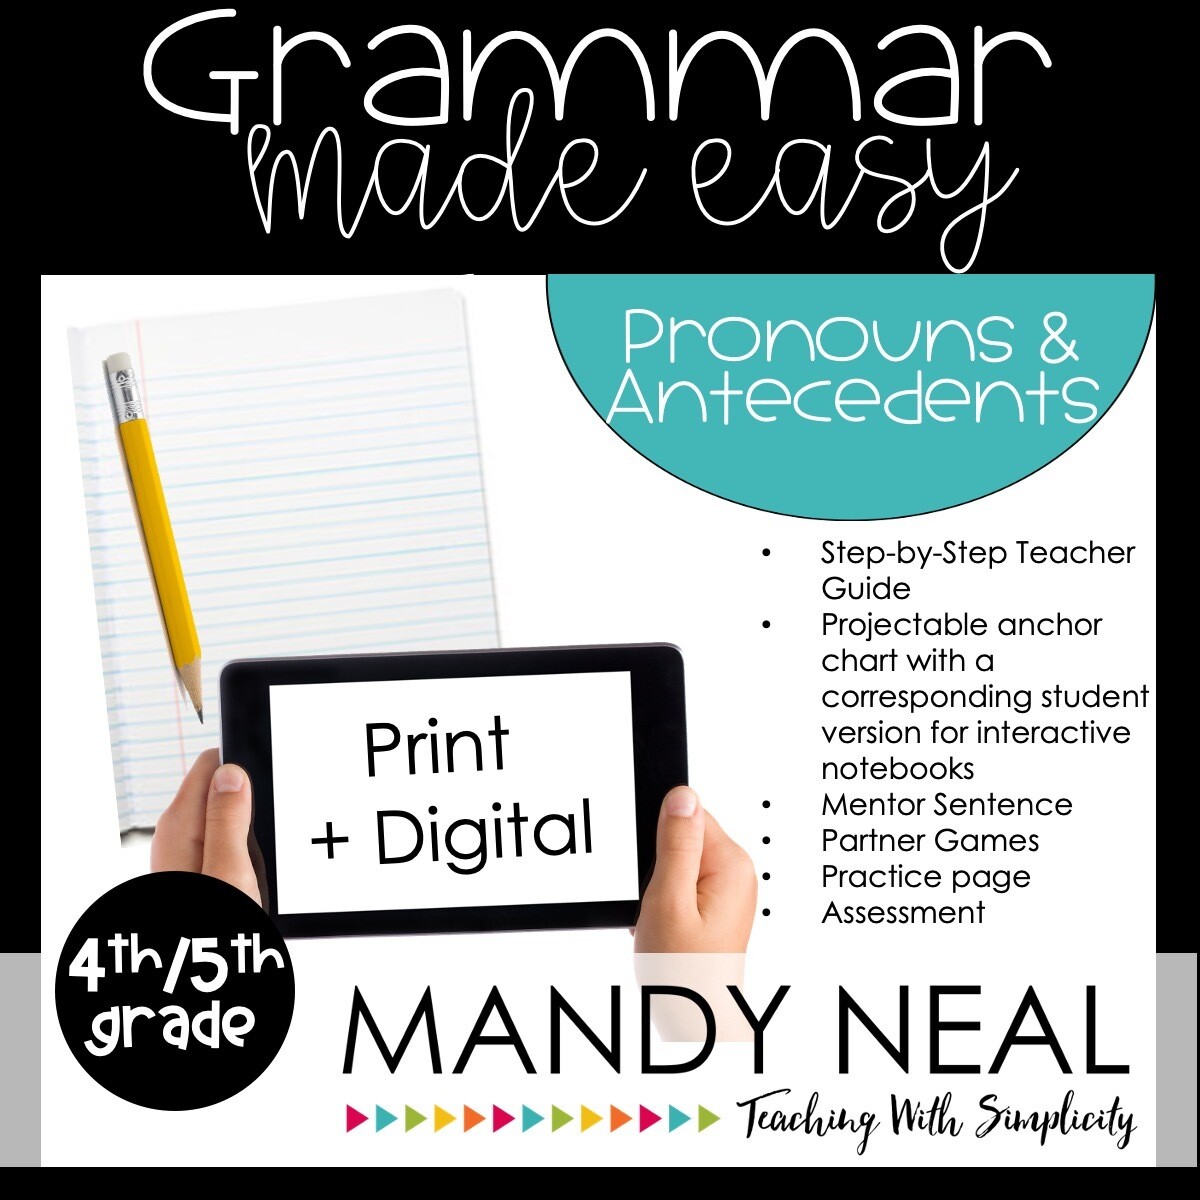 Print + Digital Fourth and Fifth Grade Grammar Activities (Pronouns and Antecedents)